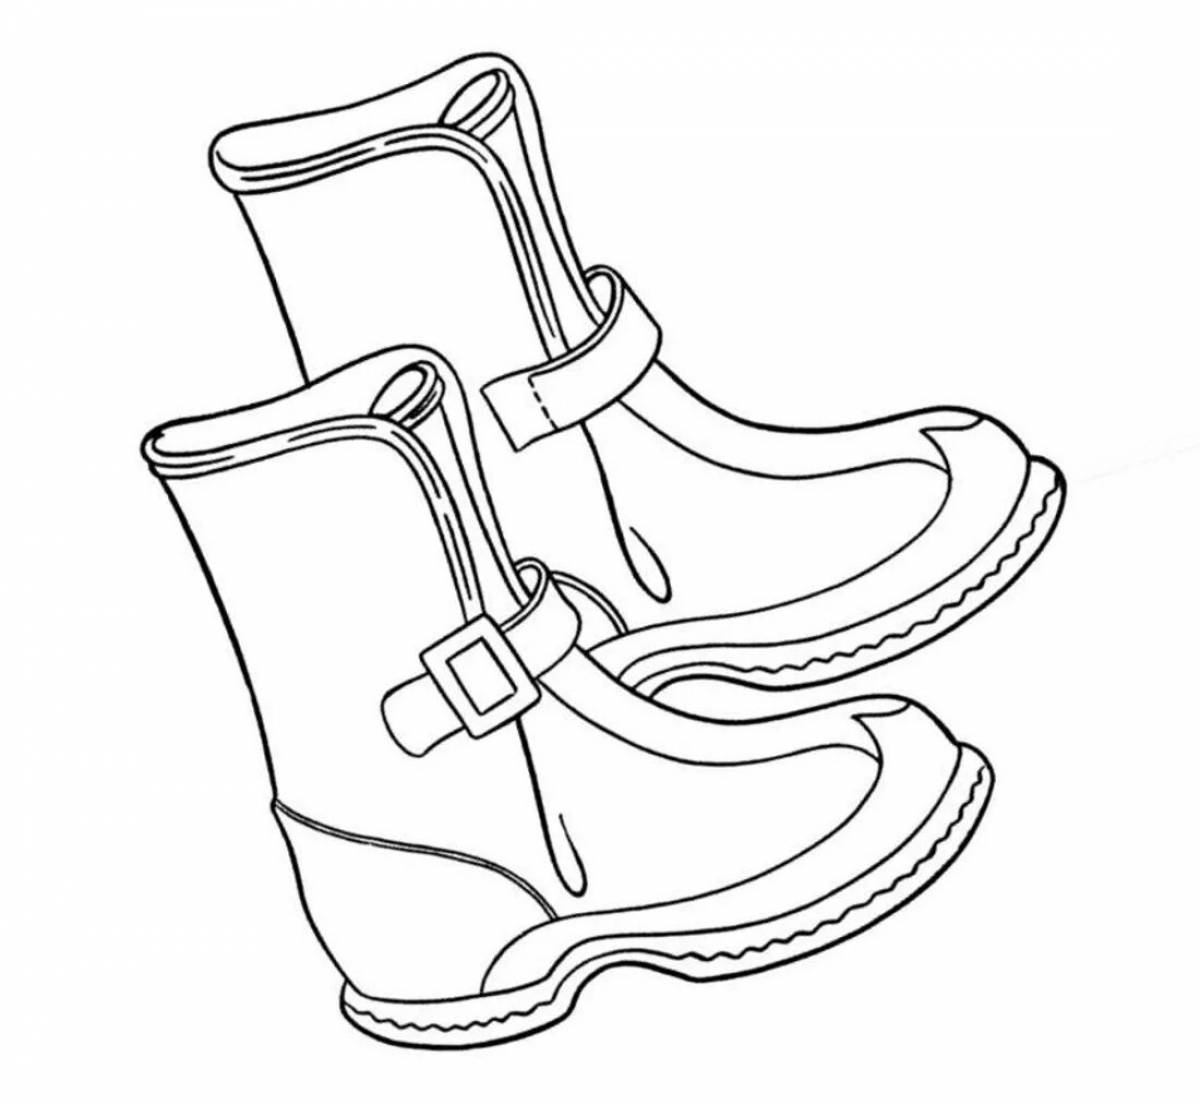 Funny juvenile shoes coloring page